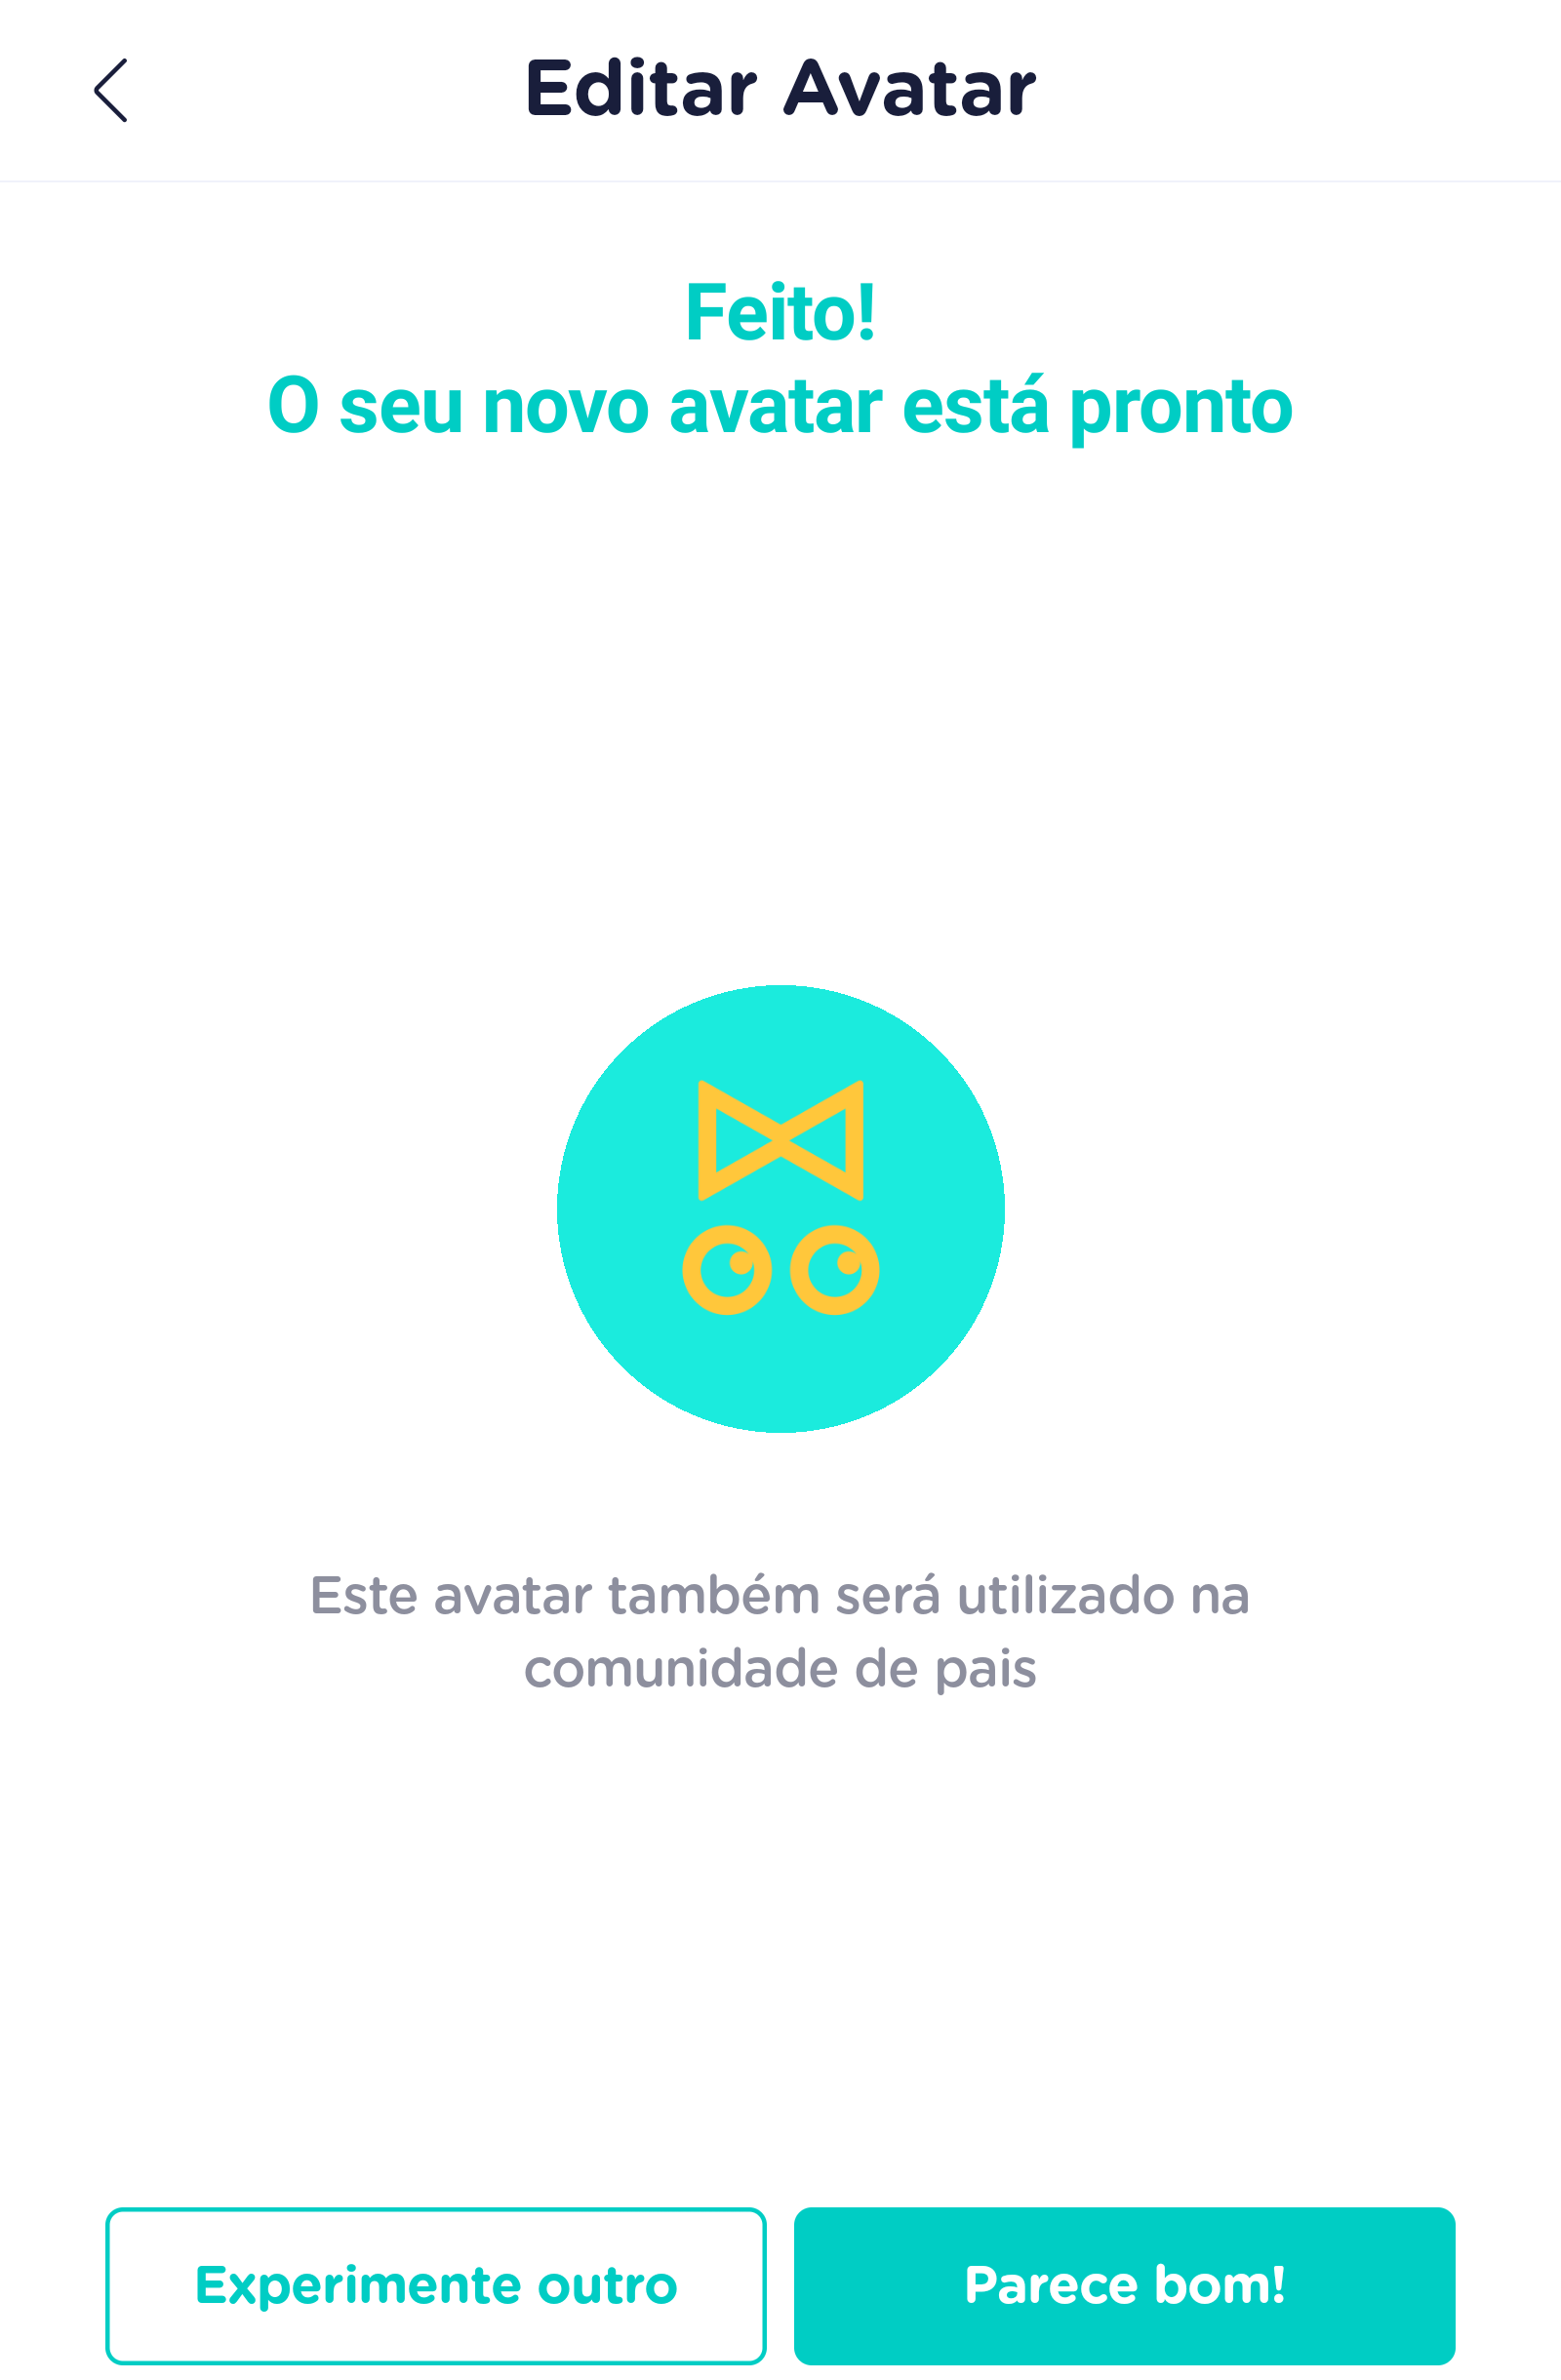 How_to_create_edit_Parents_avatar_6__PT_BR_.png